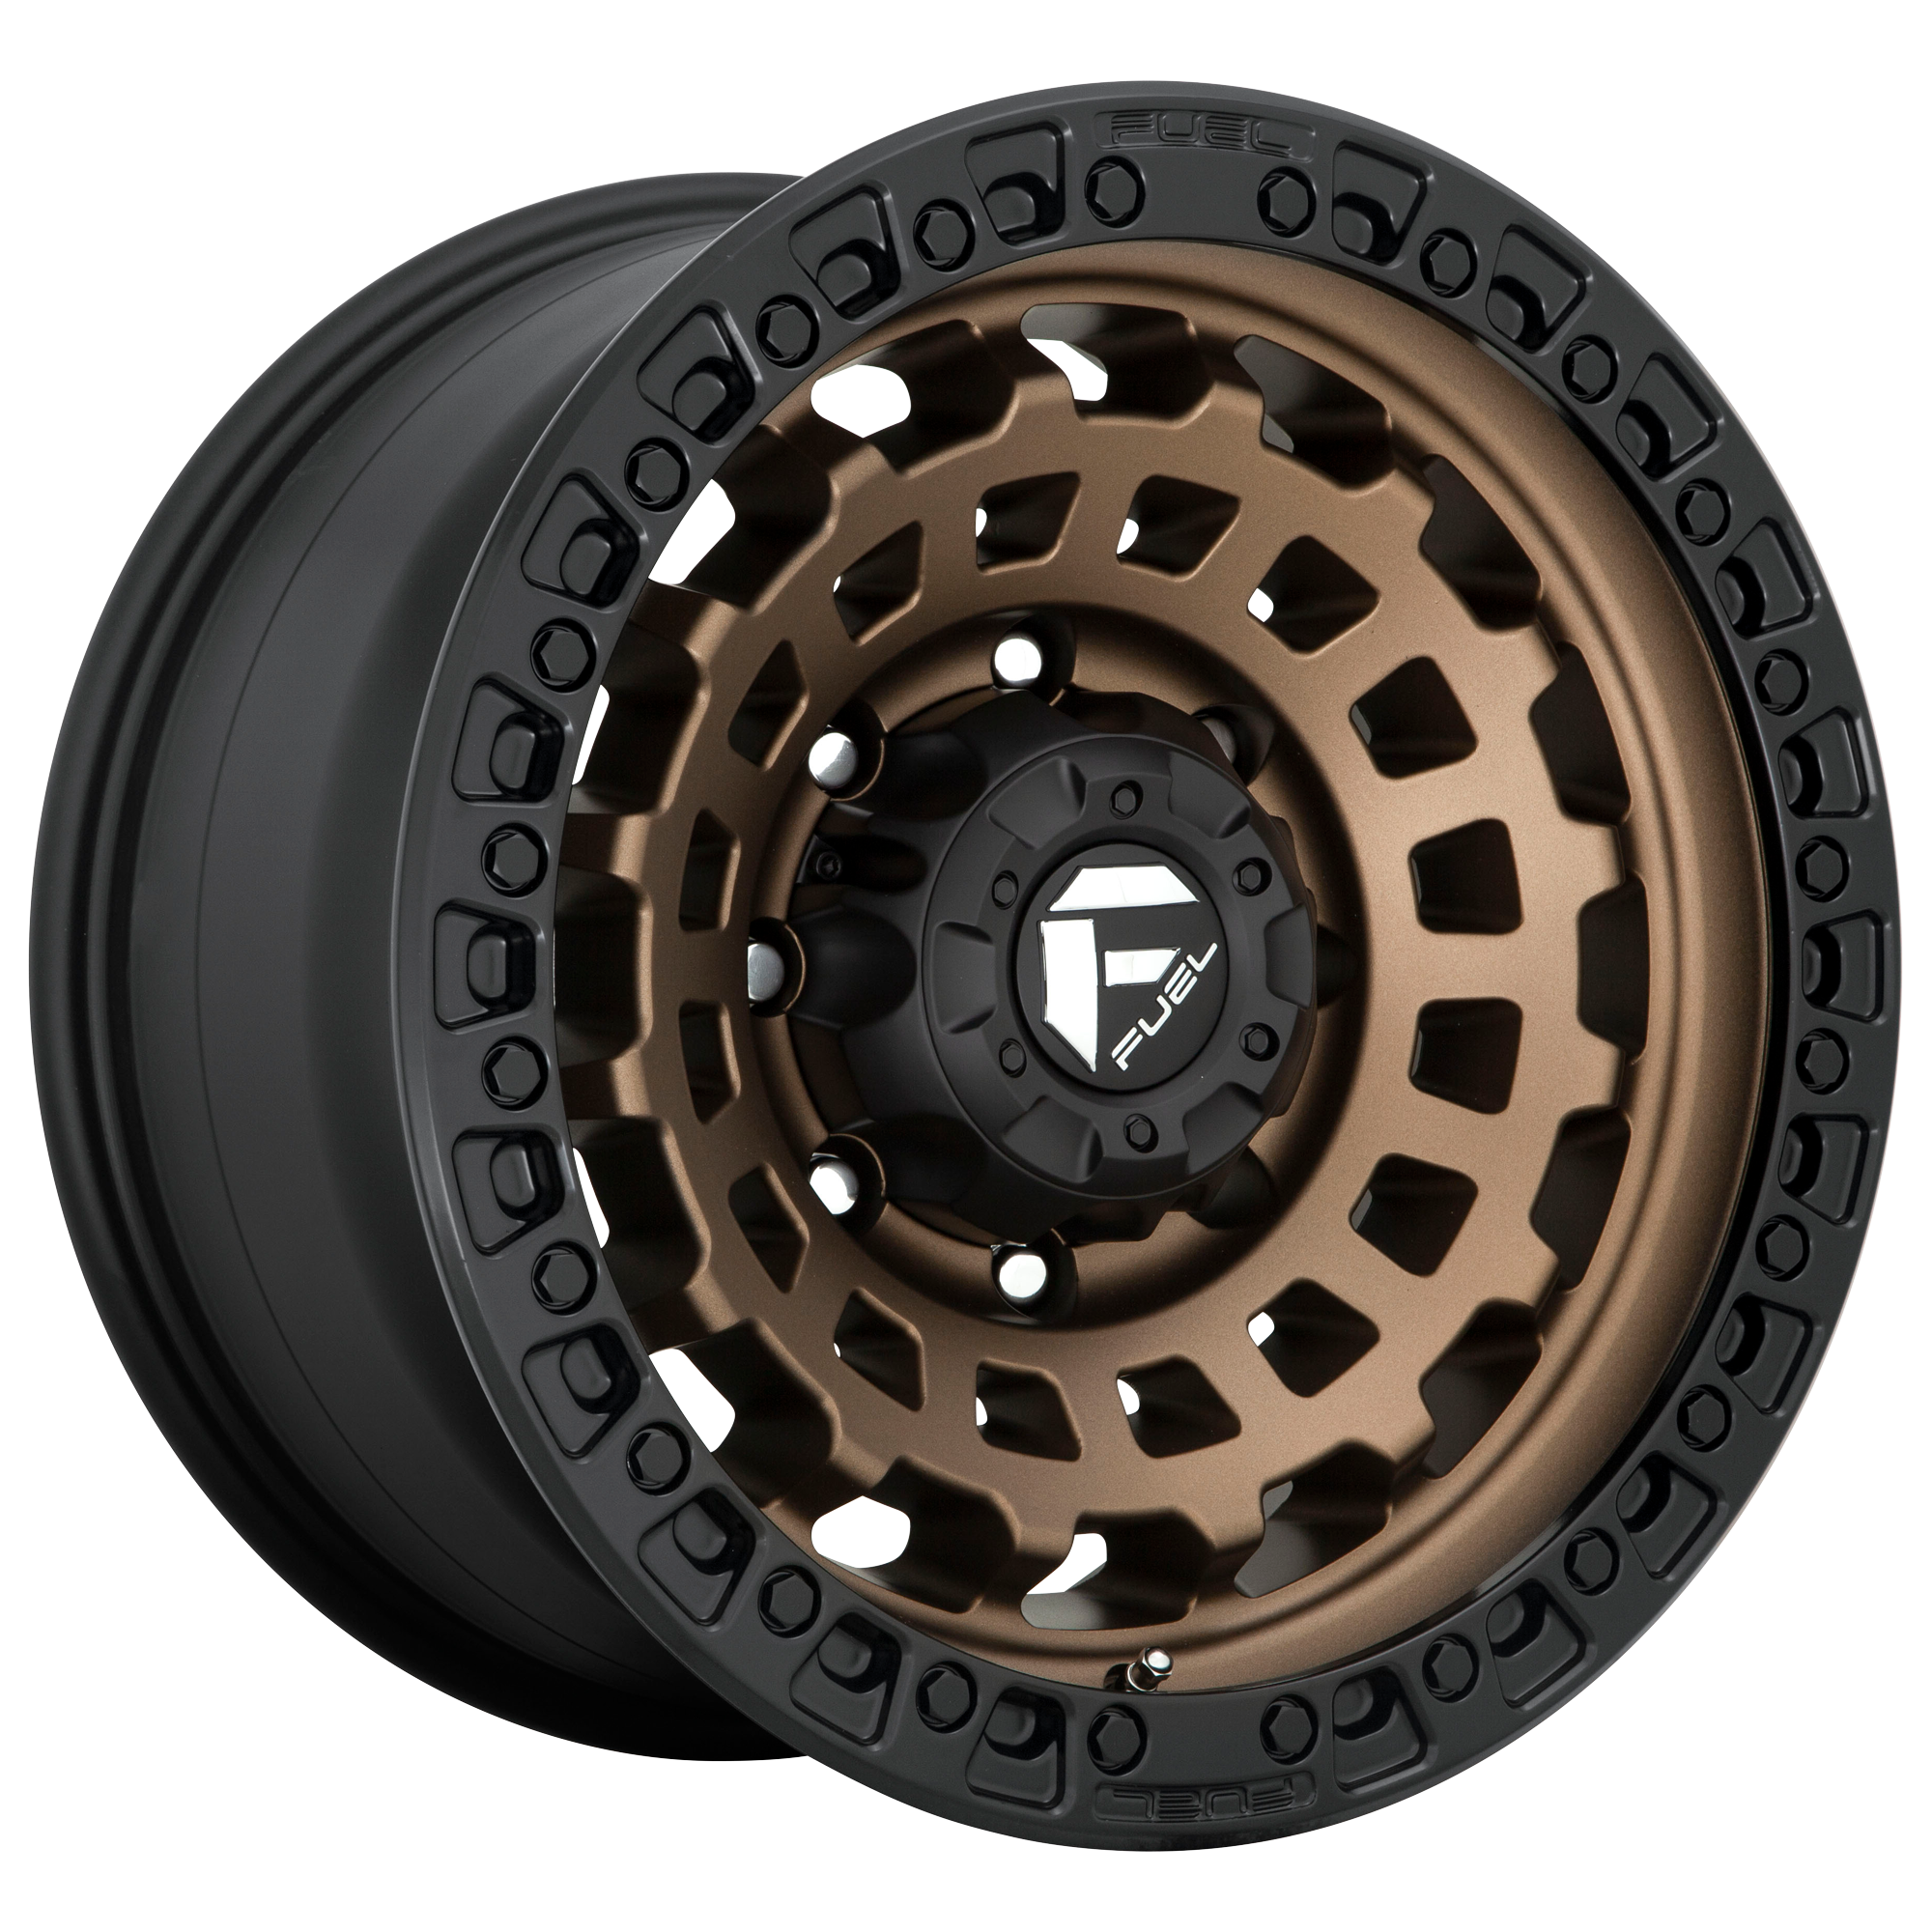 ZEPHYR 18x9 5x150.00 MATTE BRONZE BLACK BEAD RING (1 mm) - Tires and Engine Performance